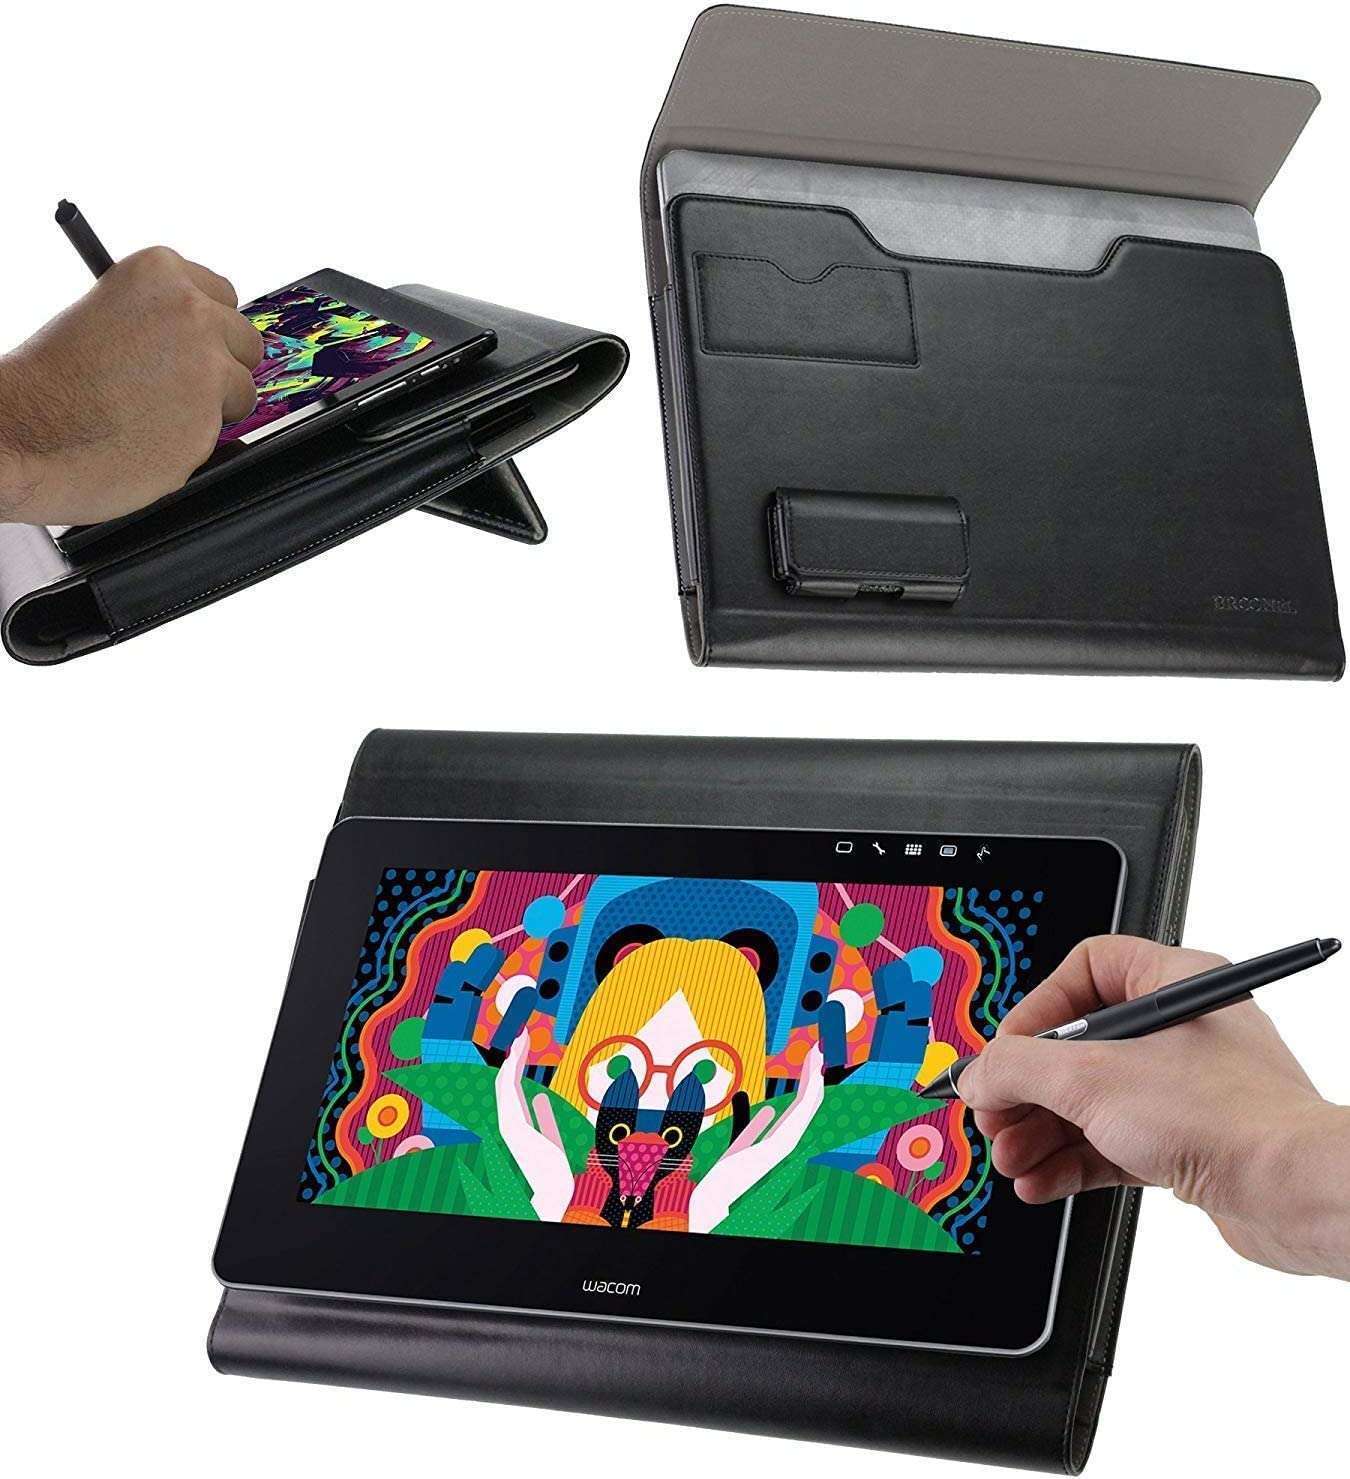 Broonel Leather Graphics Tablet Folio Case For Wacom One 13 Touch pen Display